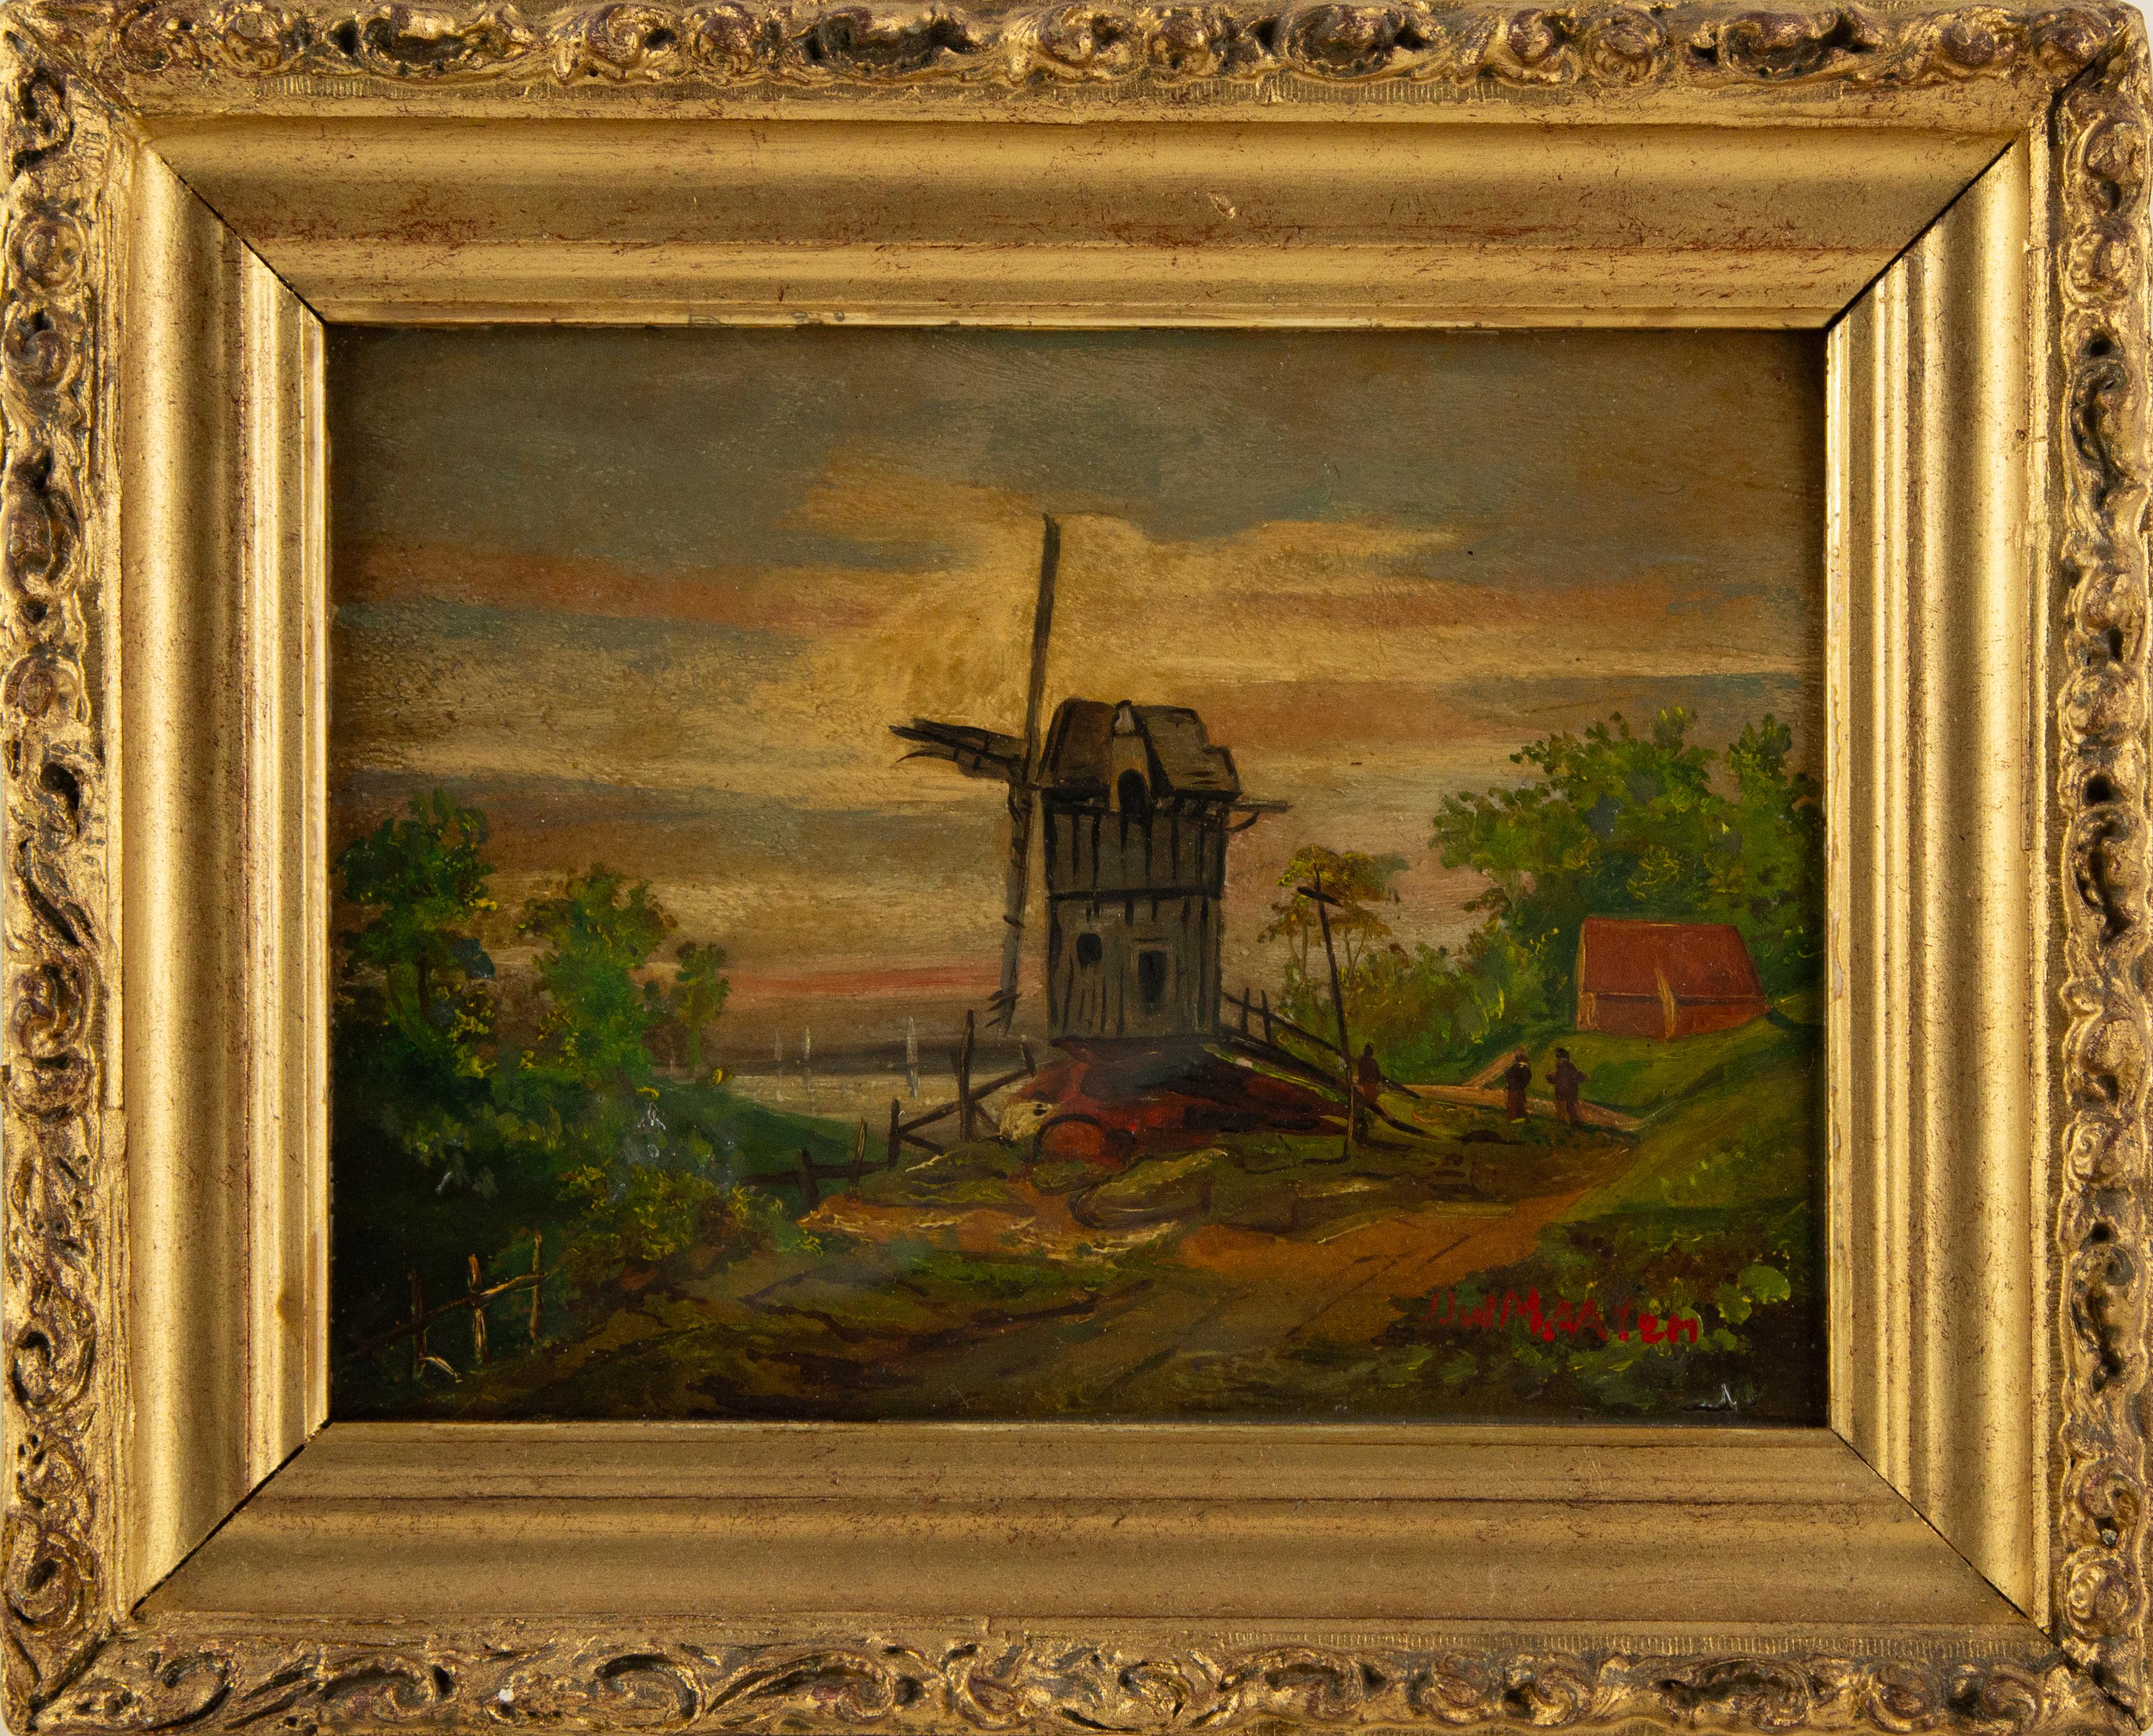 Medium: Oil On Board

Painting Size: 6 x 8 inches
Frame Size: 9 x 10.5 inches

Condition: This artwork is in good overall condition for its age.
Signature: Signed
Artist: Jacob Jan van der Maaten (1820-1879)
About Artist: Jacob Jan van der Maaten (4